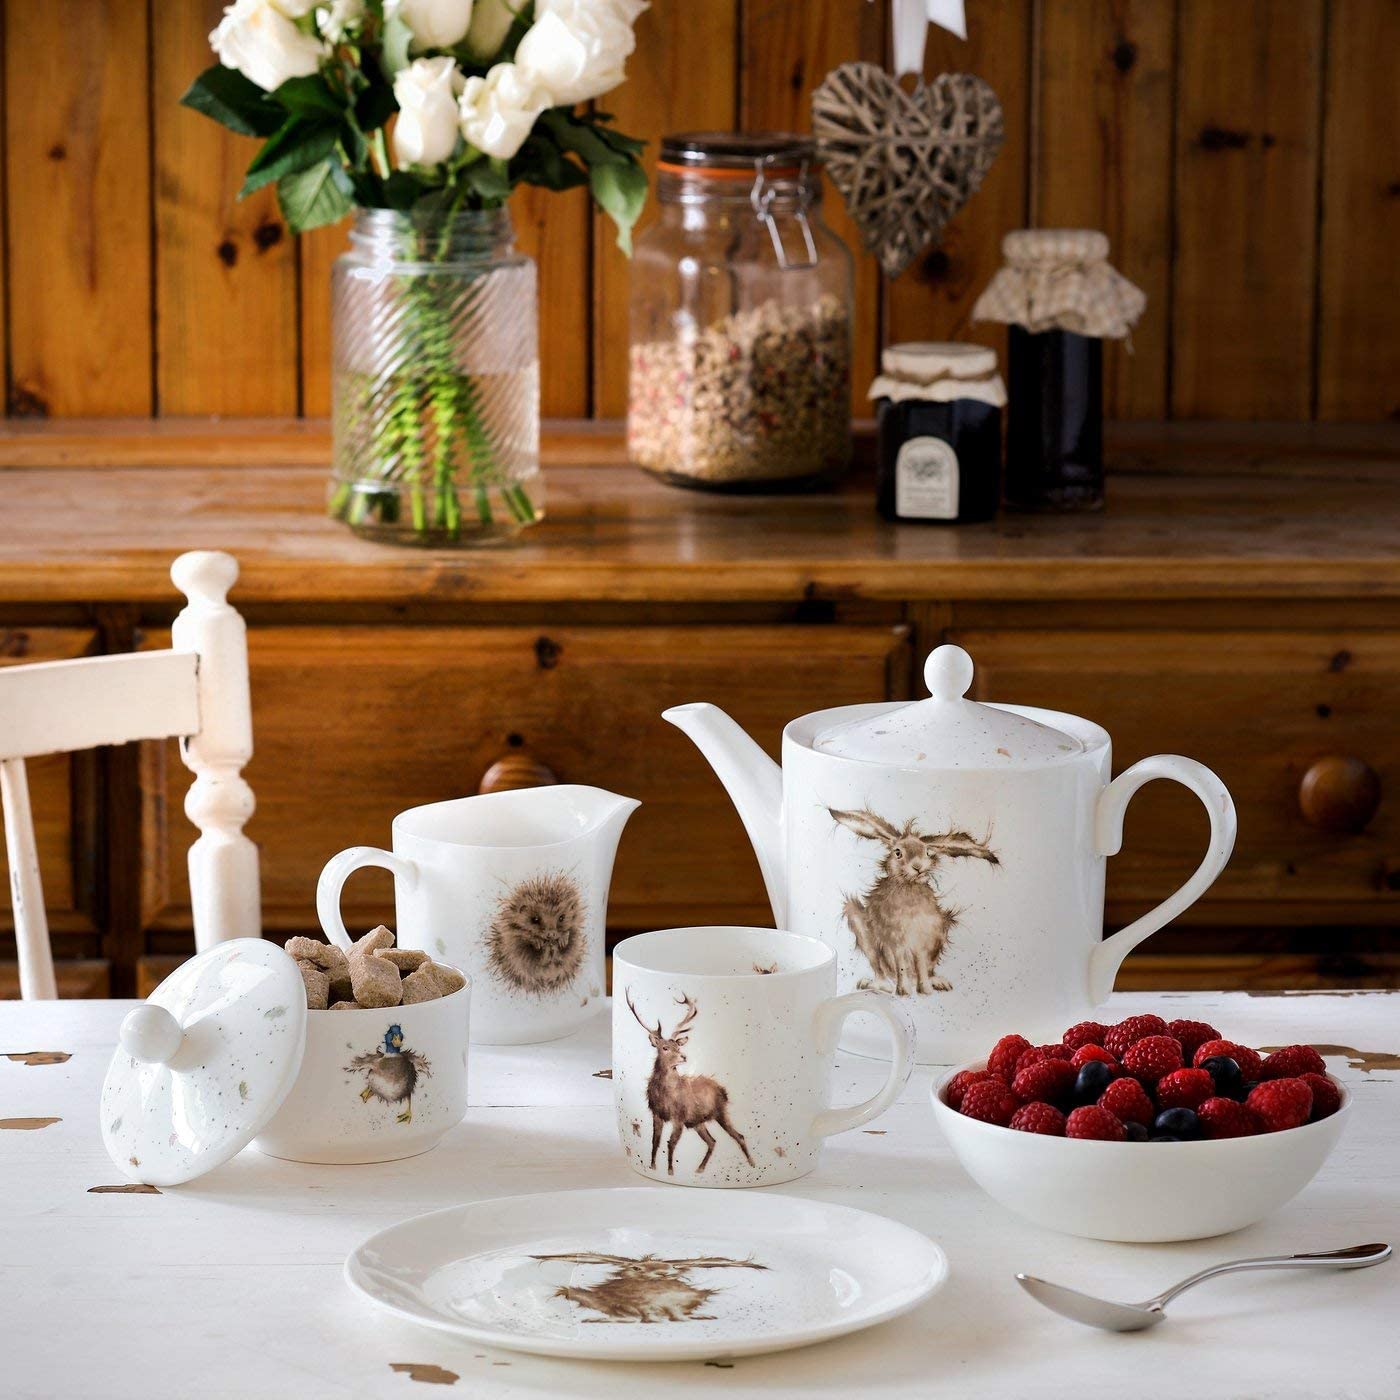 Wrendale Designs Pottery Range- Country Kitchen by Royal Worcester